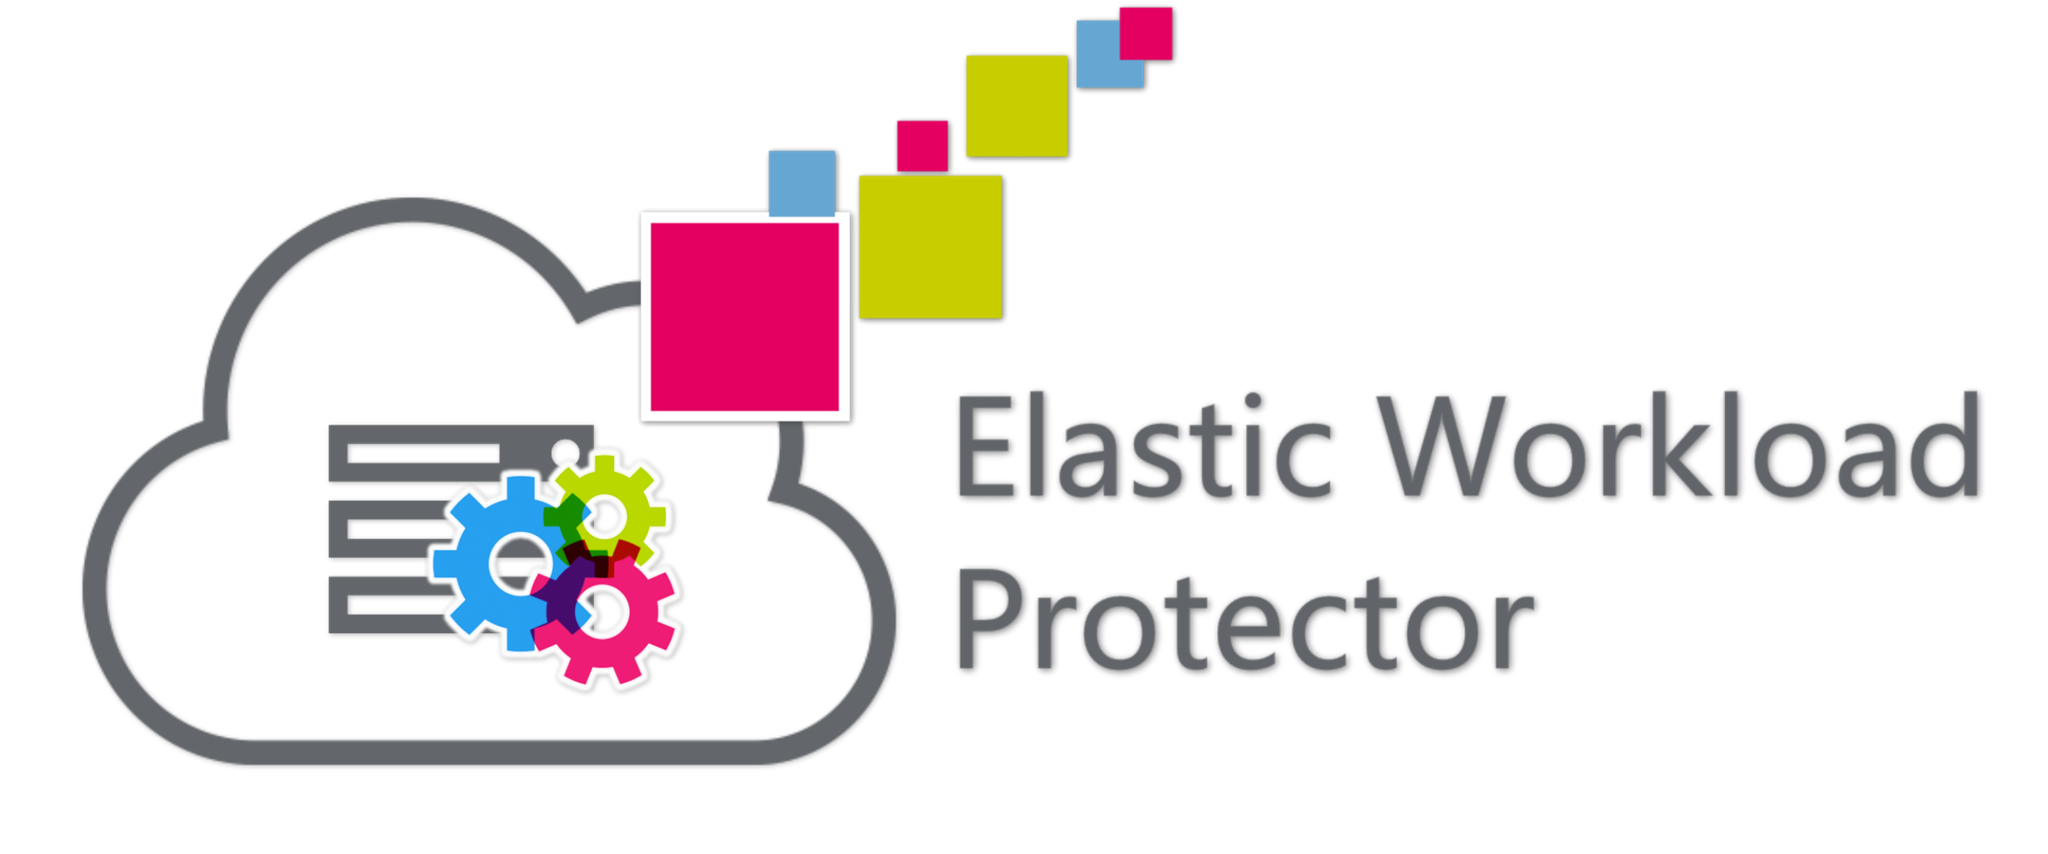 Review Elastic Workload Protector: EWP to protect your Cloud and containers - Appvizer